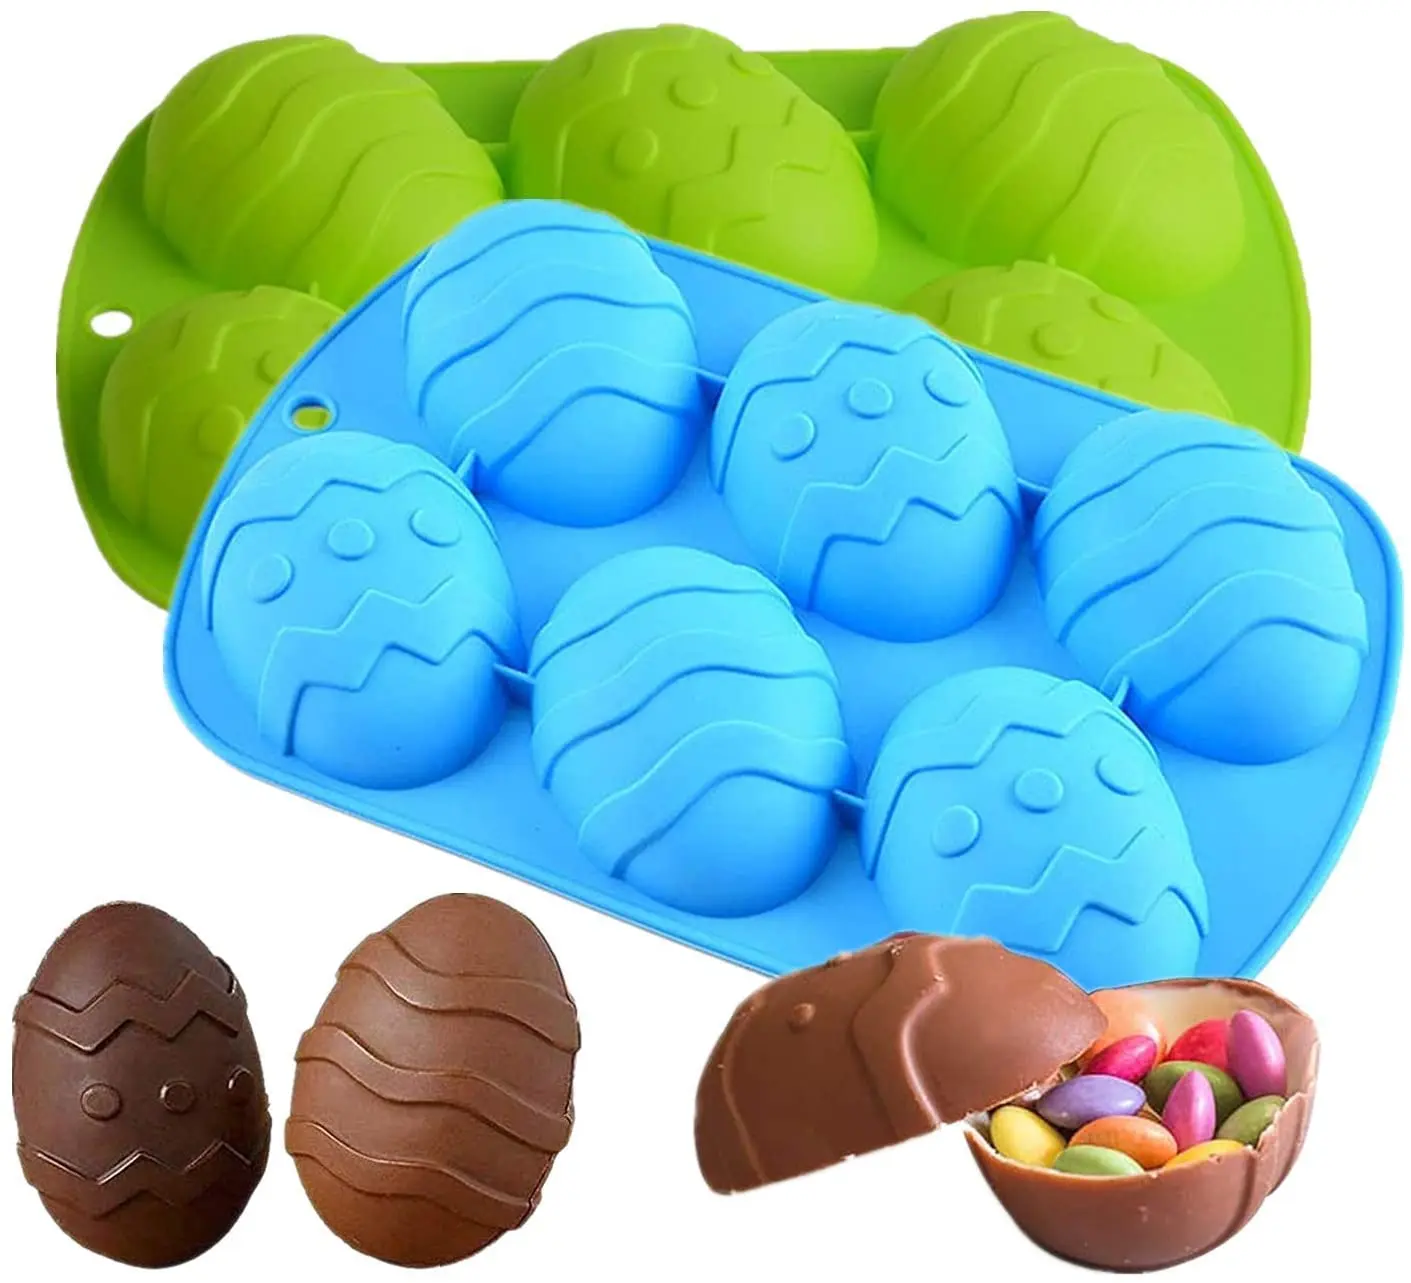 

3D Easter Egg and Rabbit Bunny Chocolate Cake Pastry Truffle Pudding Jelly Dessert Decoration Easter Silicone Mold, Purple